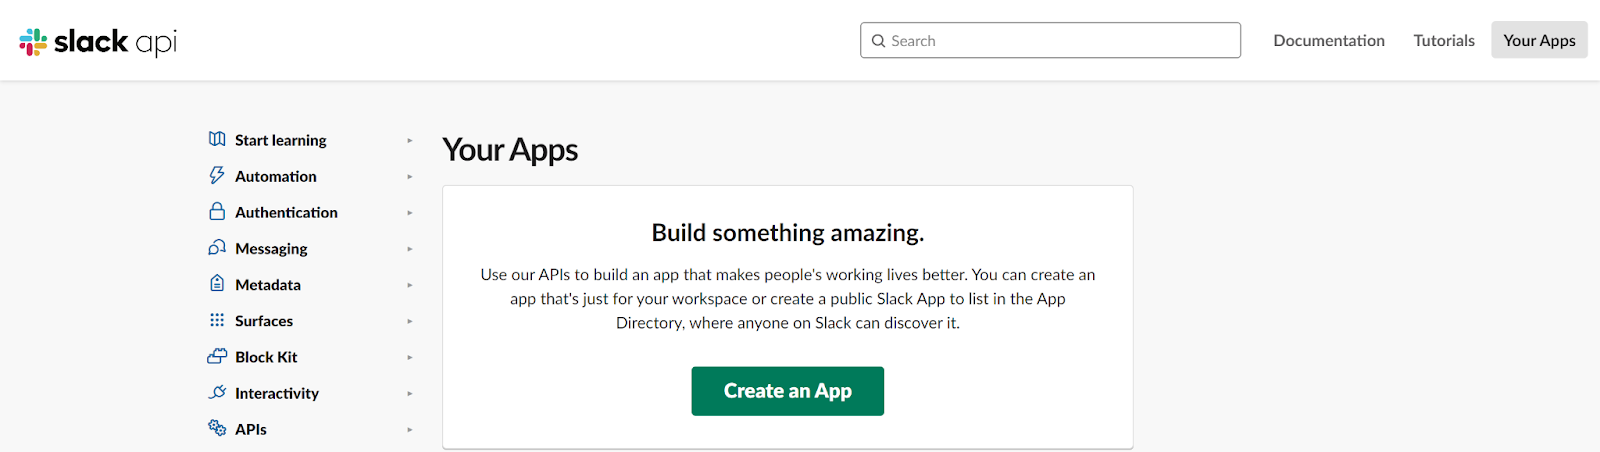 Screenshot of slack api. This shows a button for Creating an app.